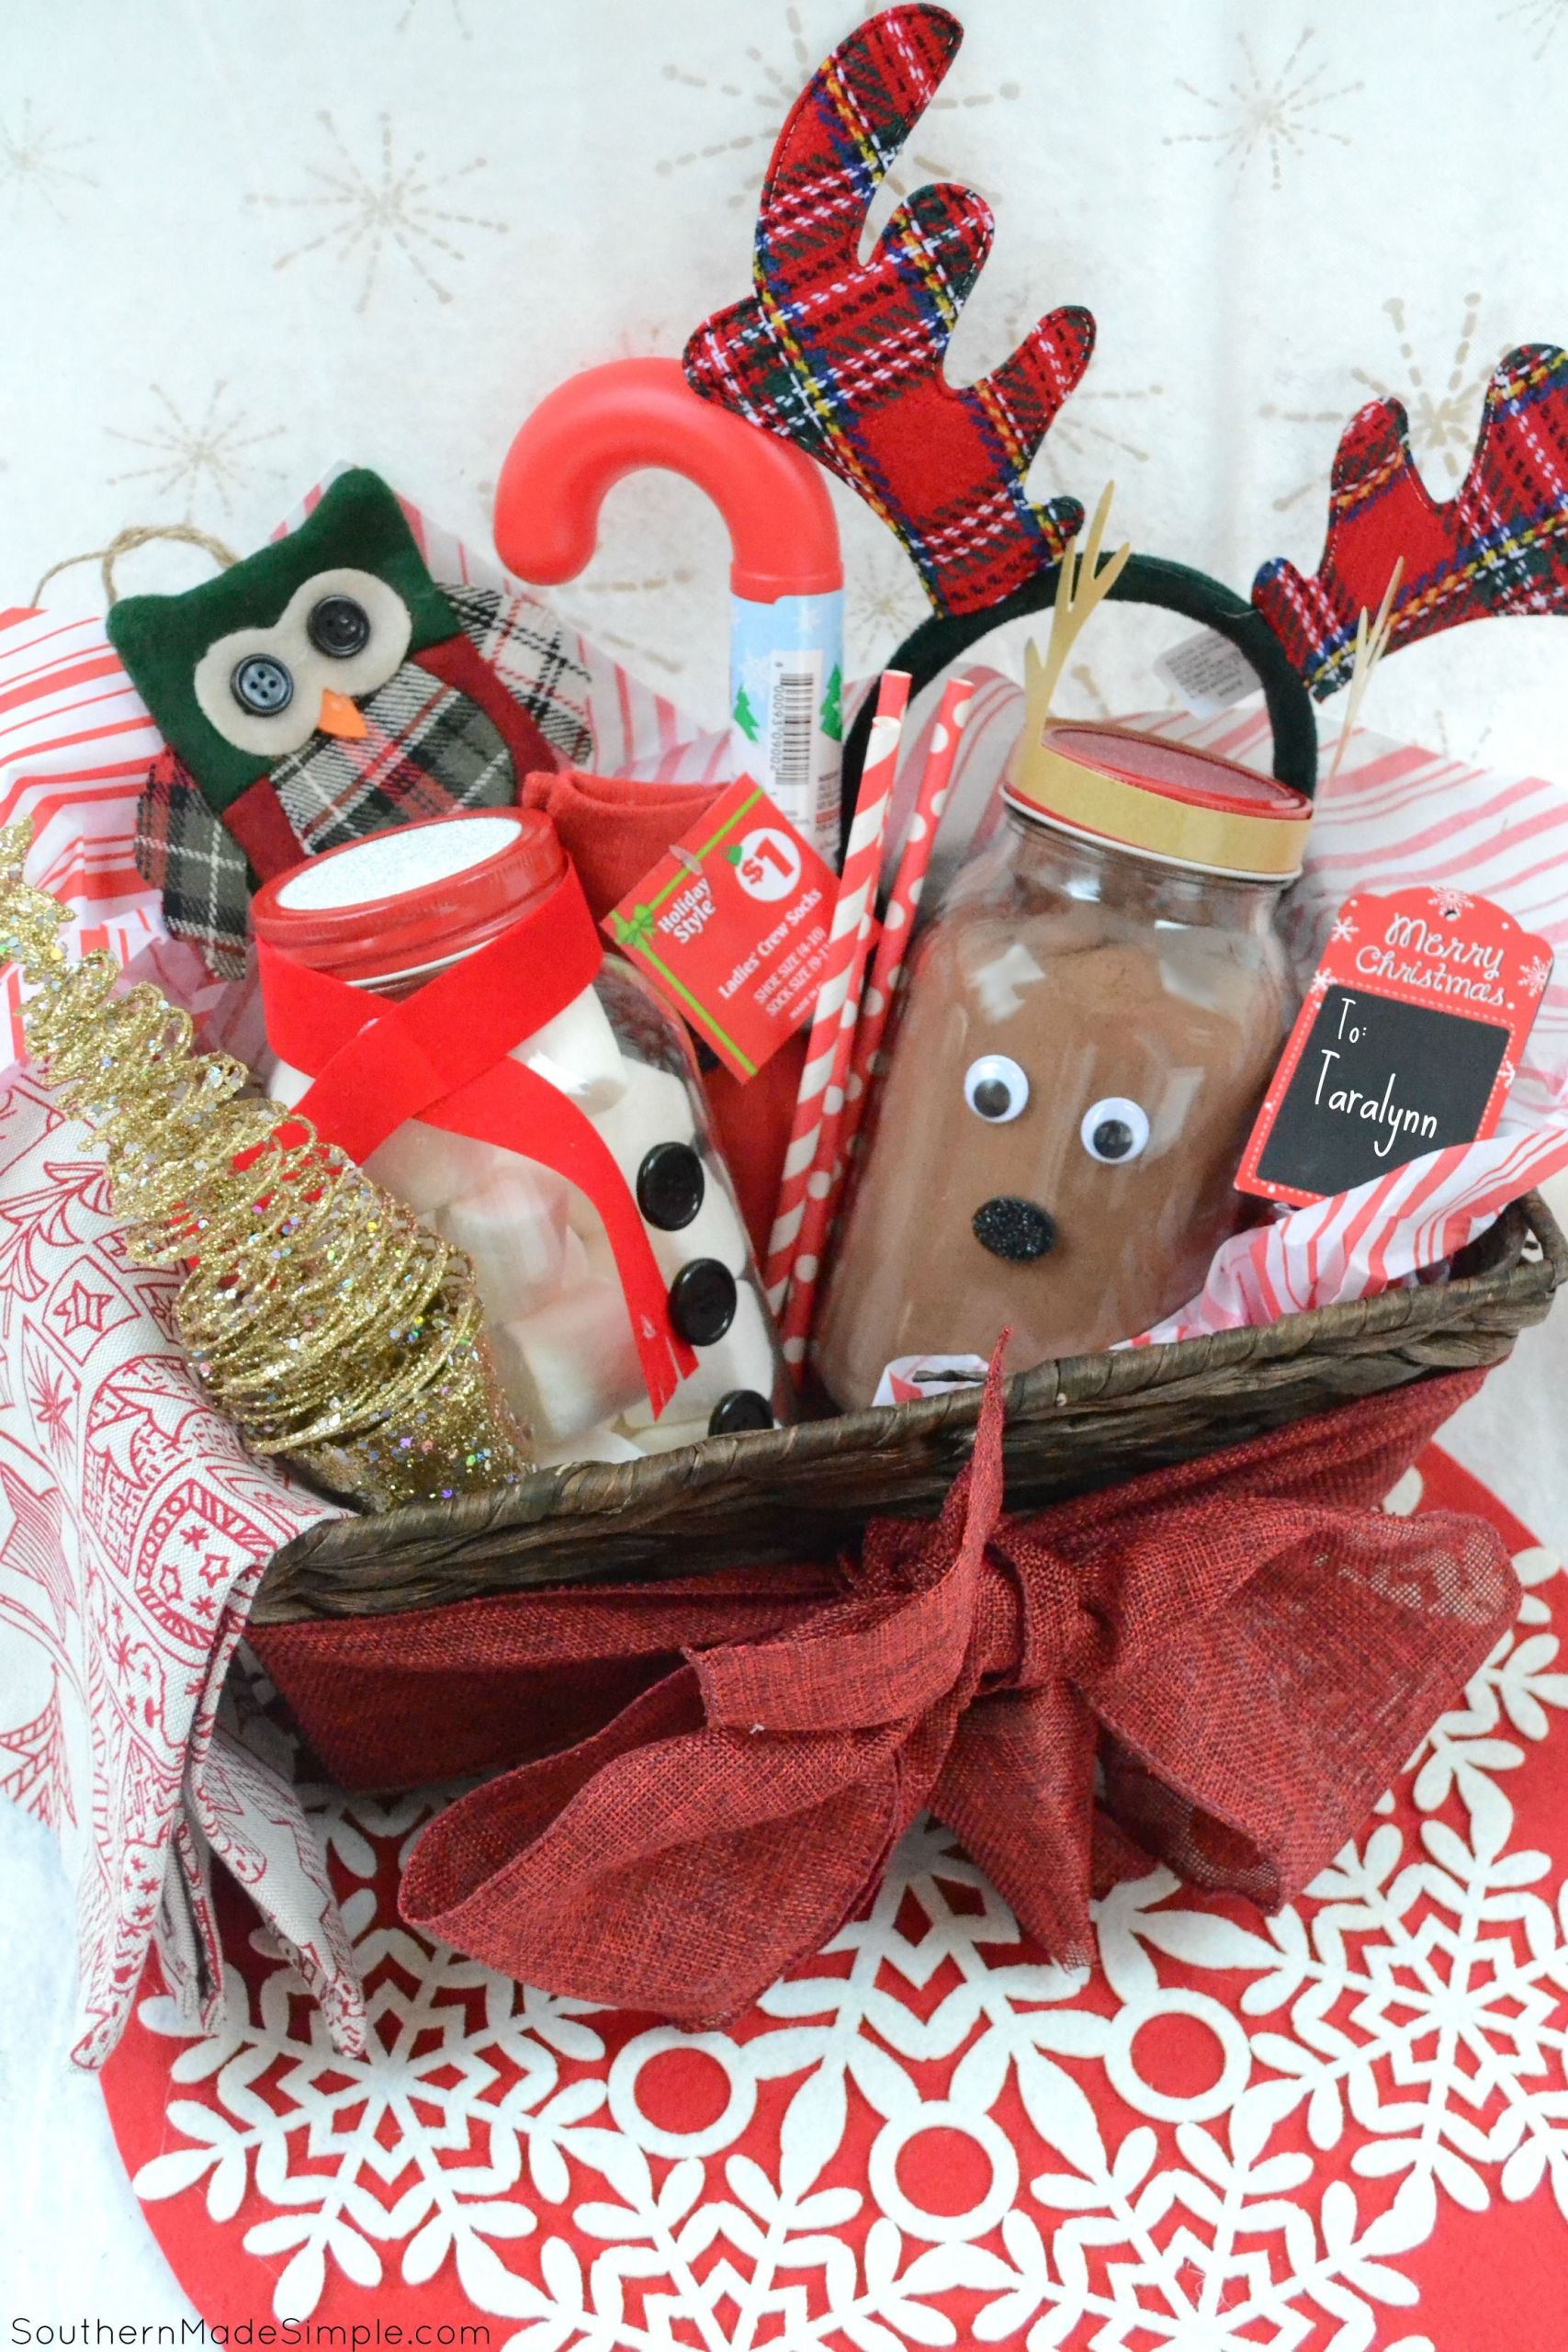 The Best Ideas for Family Gift Basket Ideas for Christmas - Home